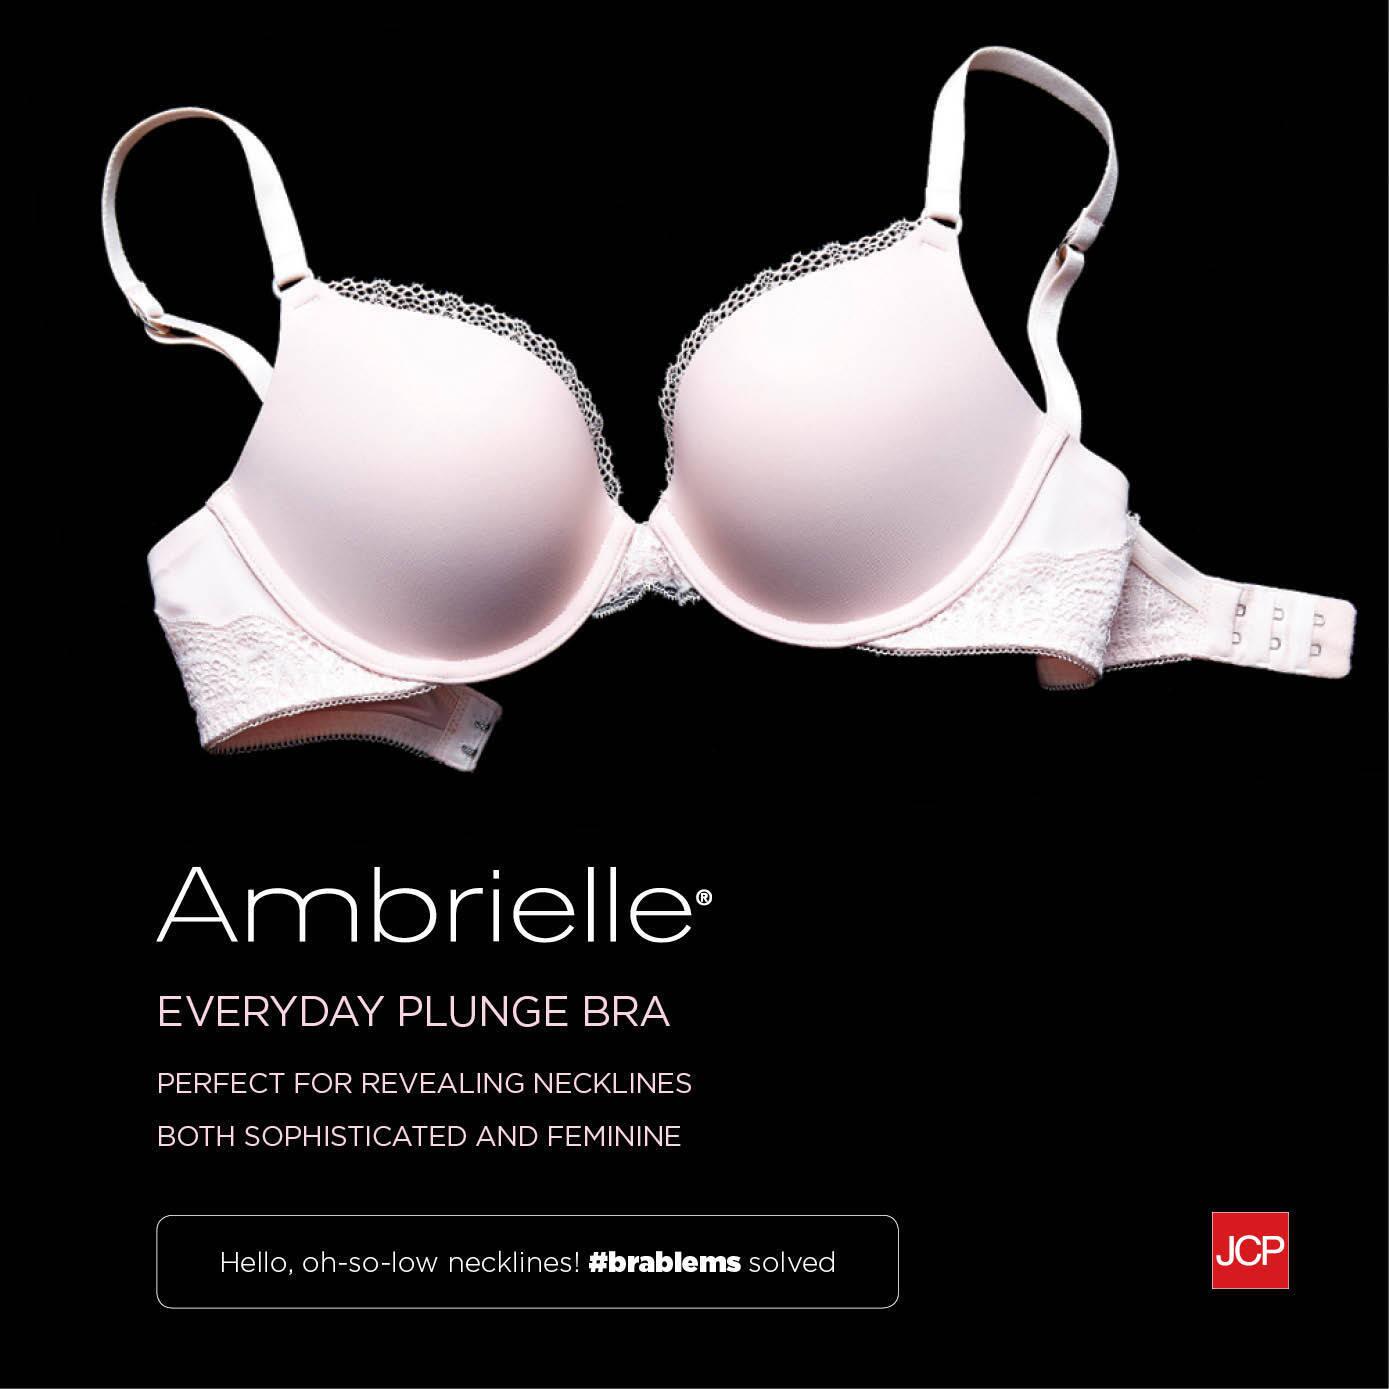 JCPenney on X: If you have #brablems we have answers. Ambrielle